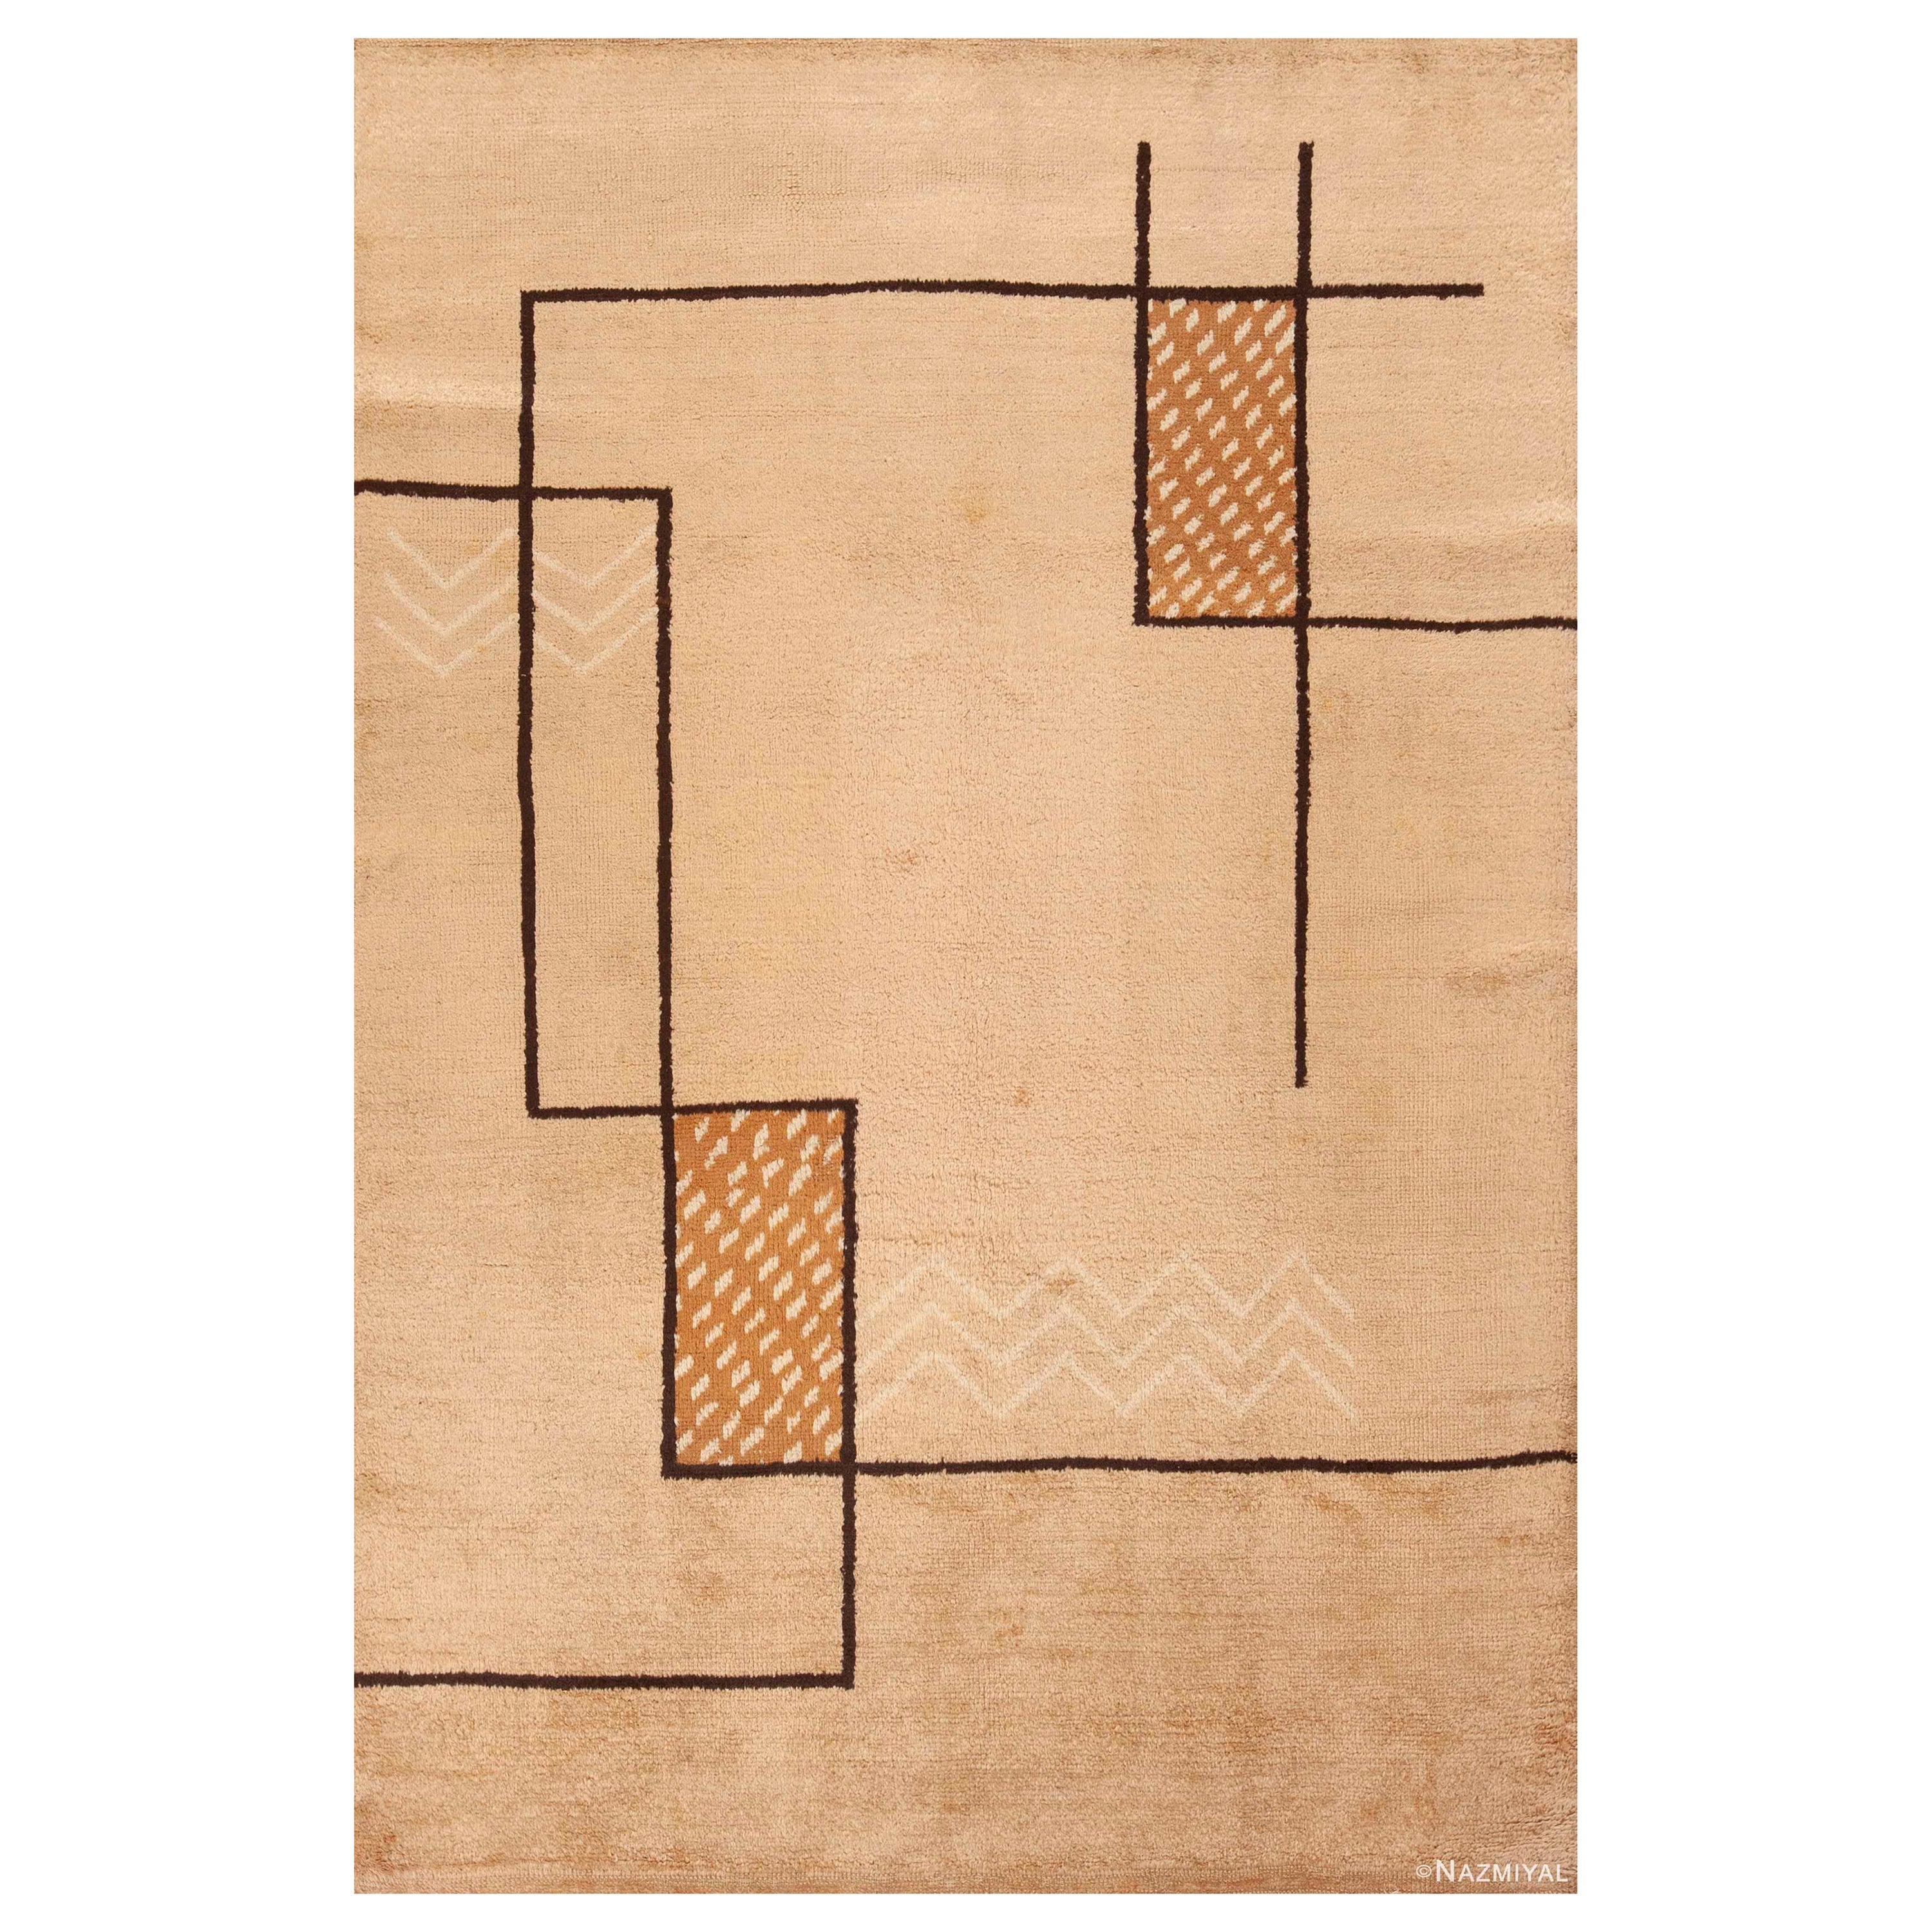 Beautifully Geometric Antique Minimalist French Art Deco Area Rug 6'5" x 9'8" For Sale